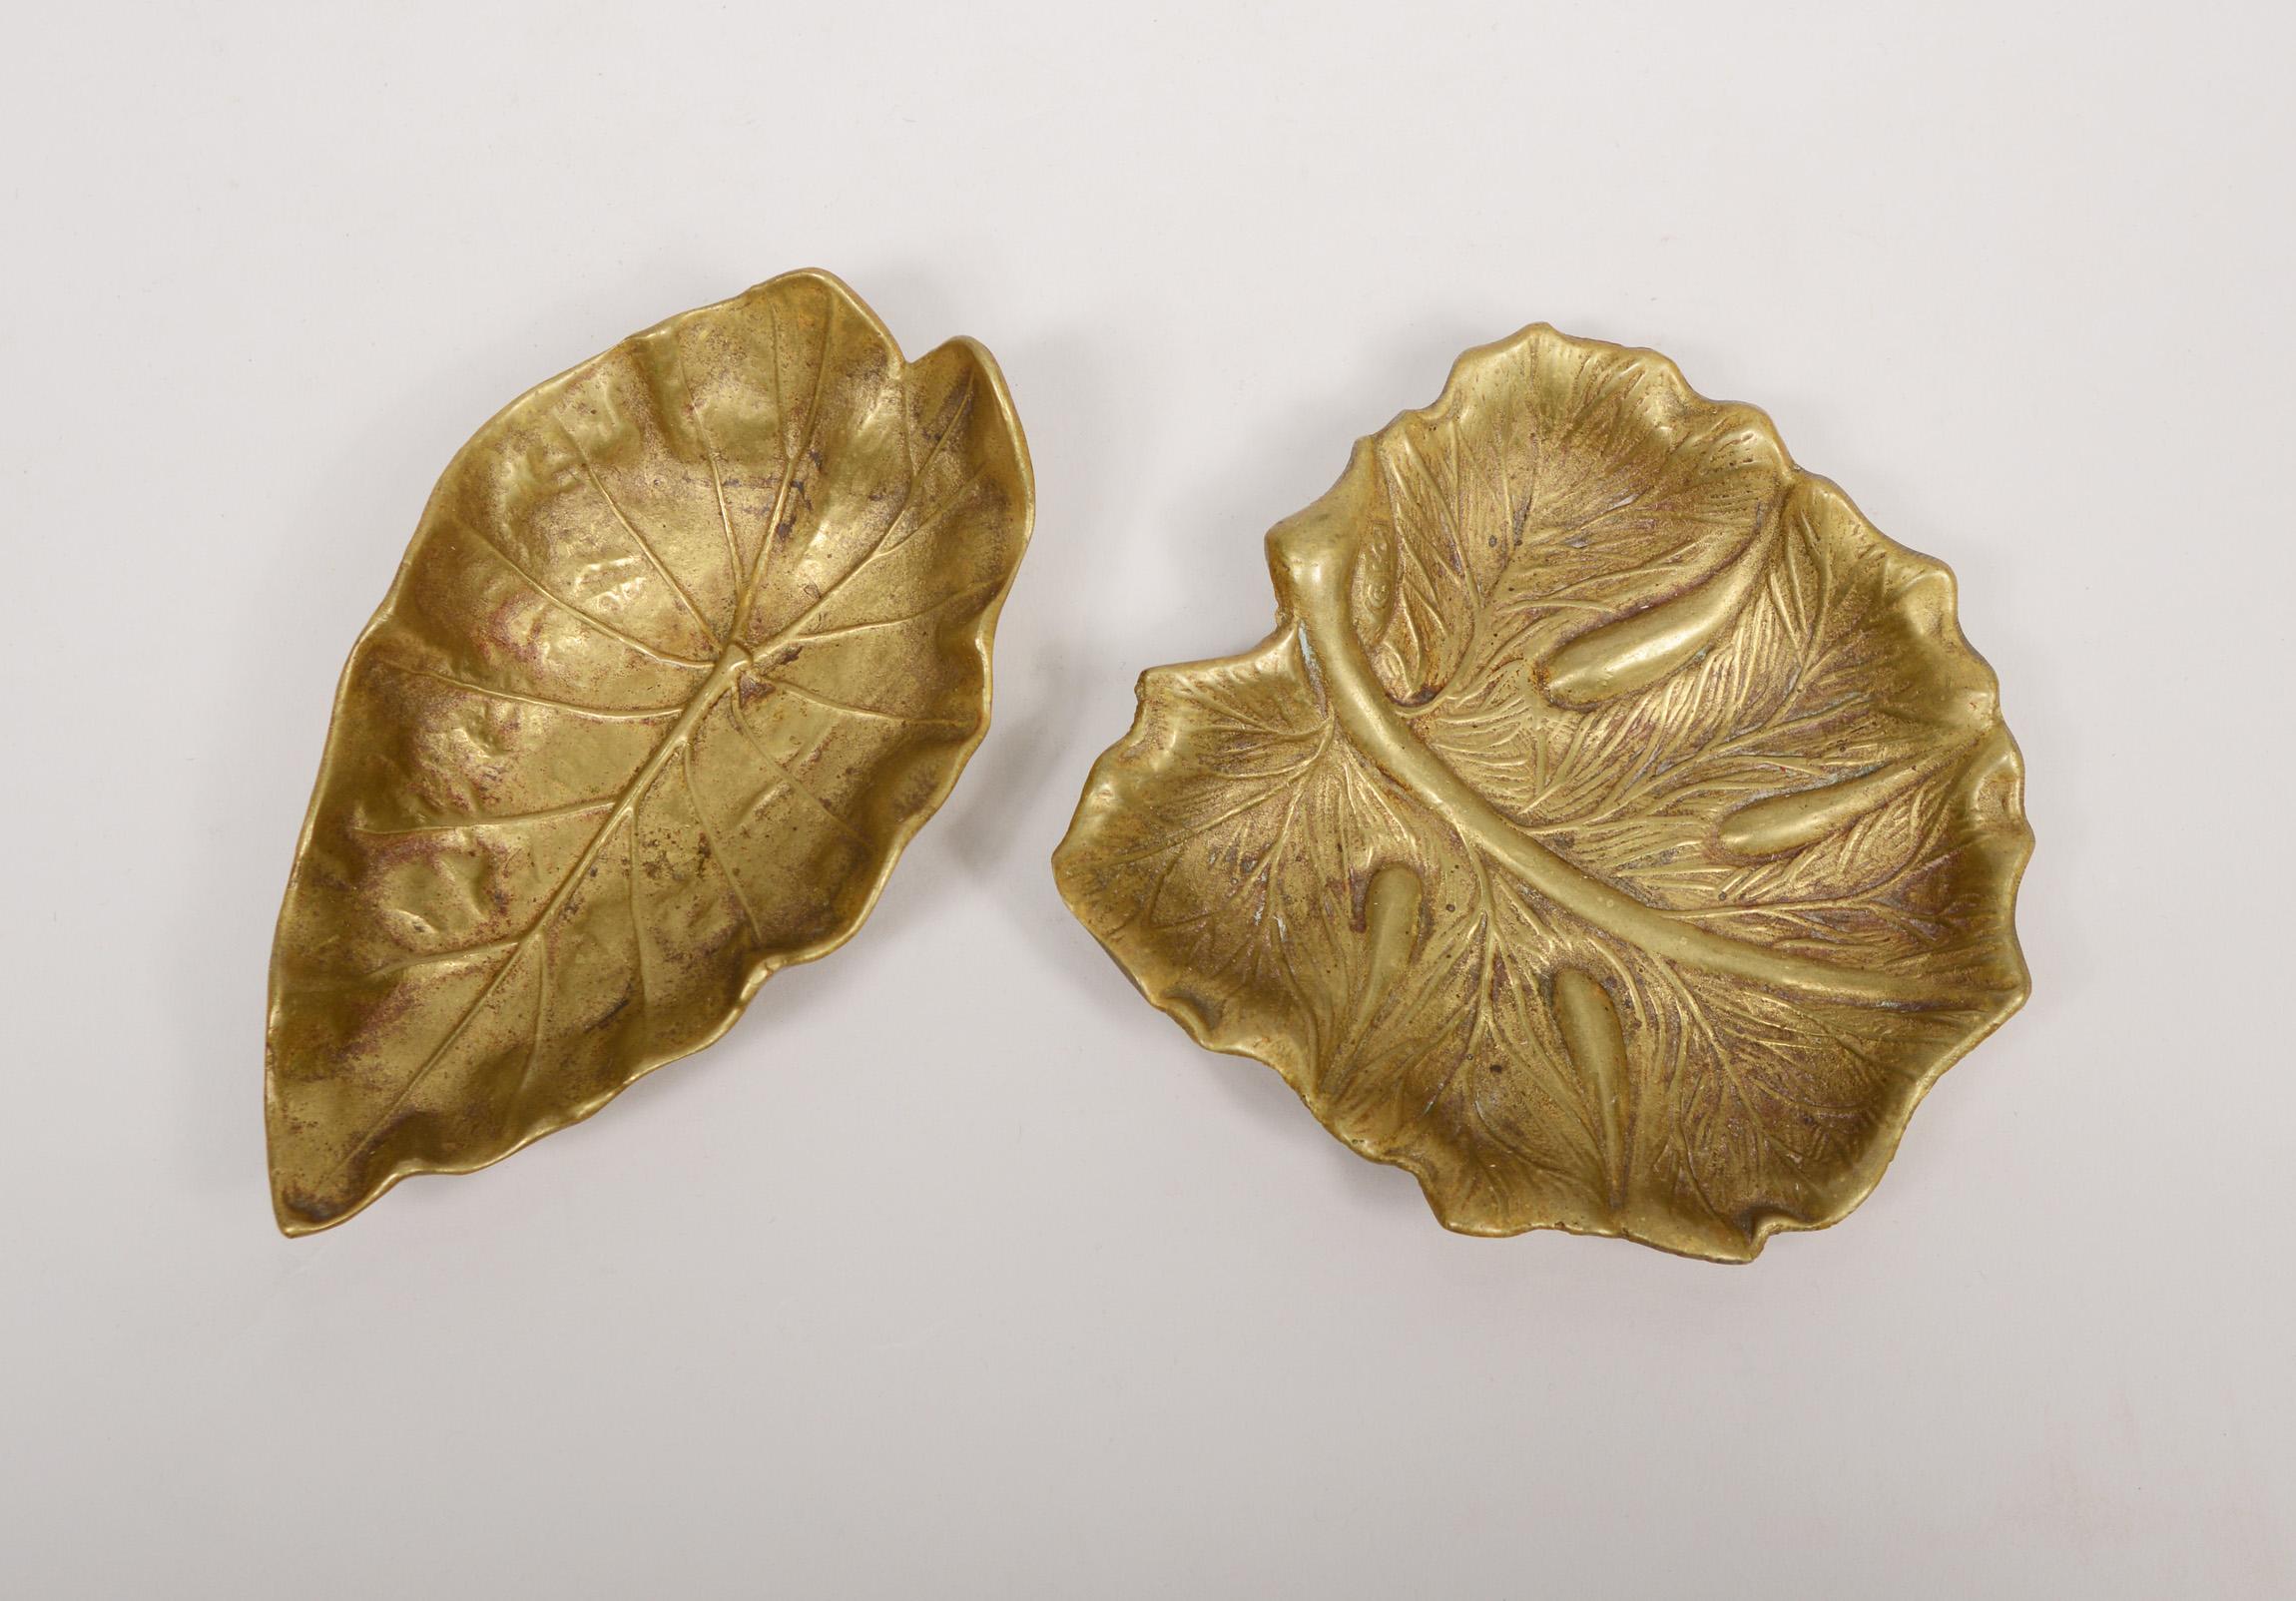 Two leaf trays designed by Oskar J.W. Hansen in 1948 for Virginia Metalcrafters. These are an imperial tarro leaf and a papaia leaf.